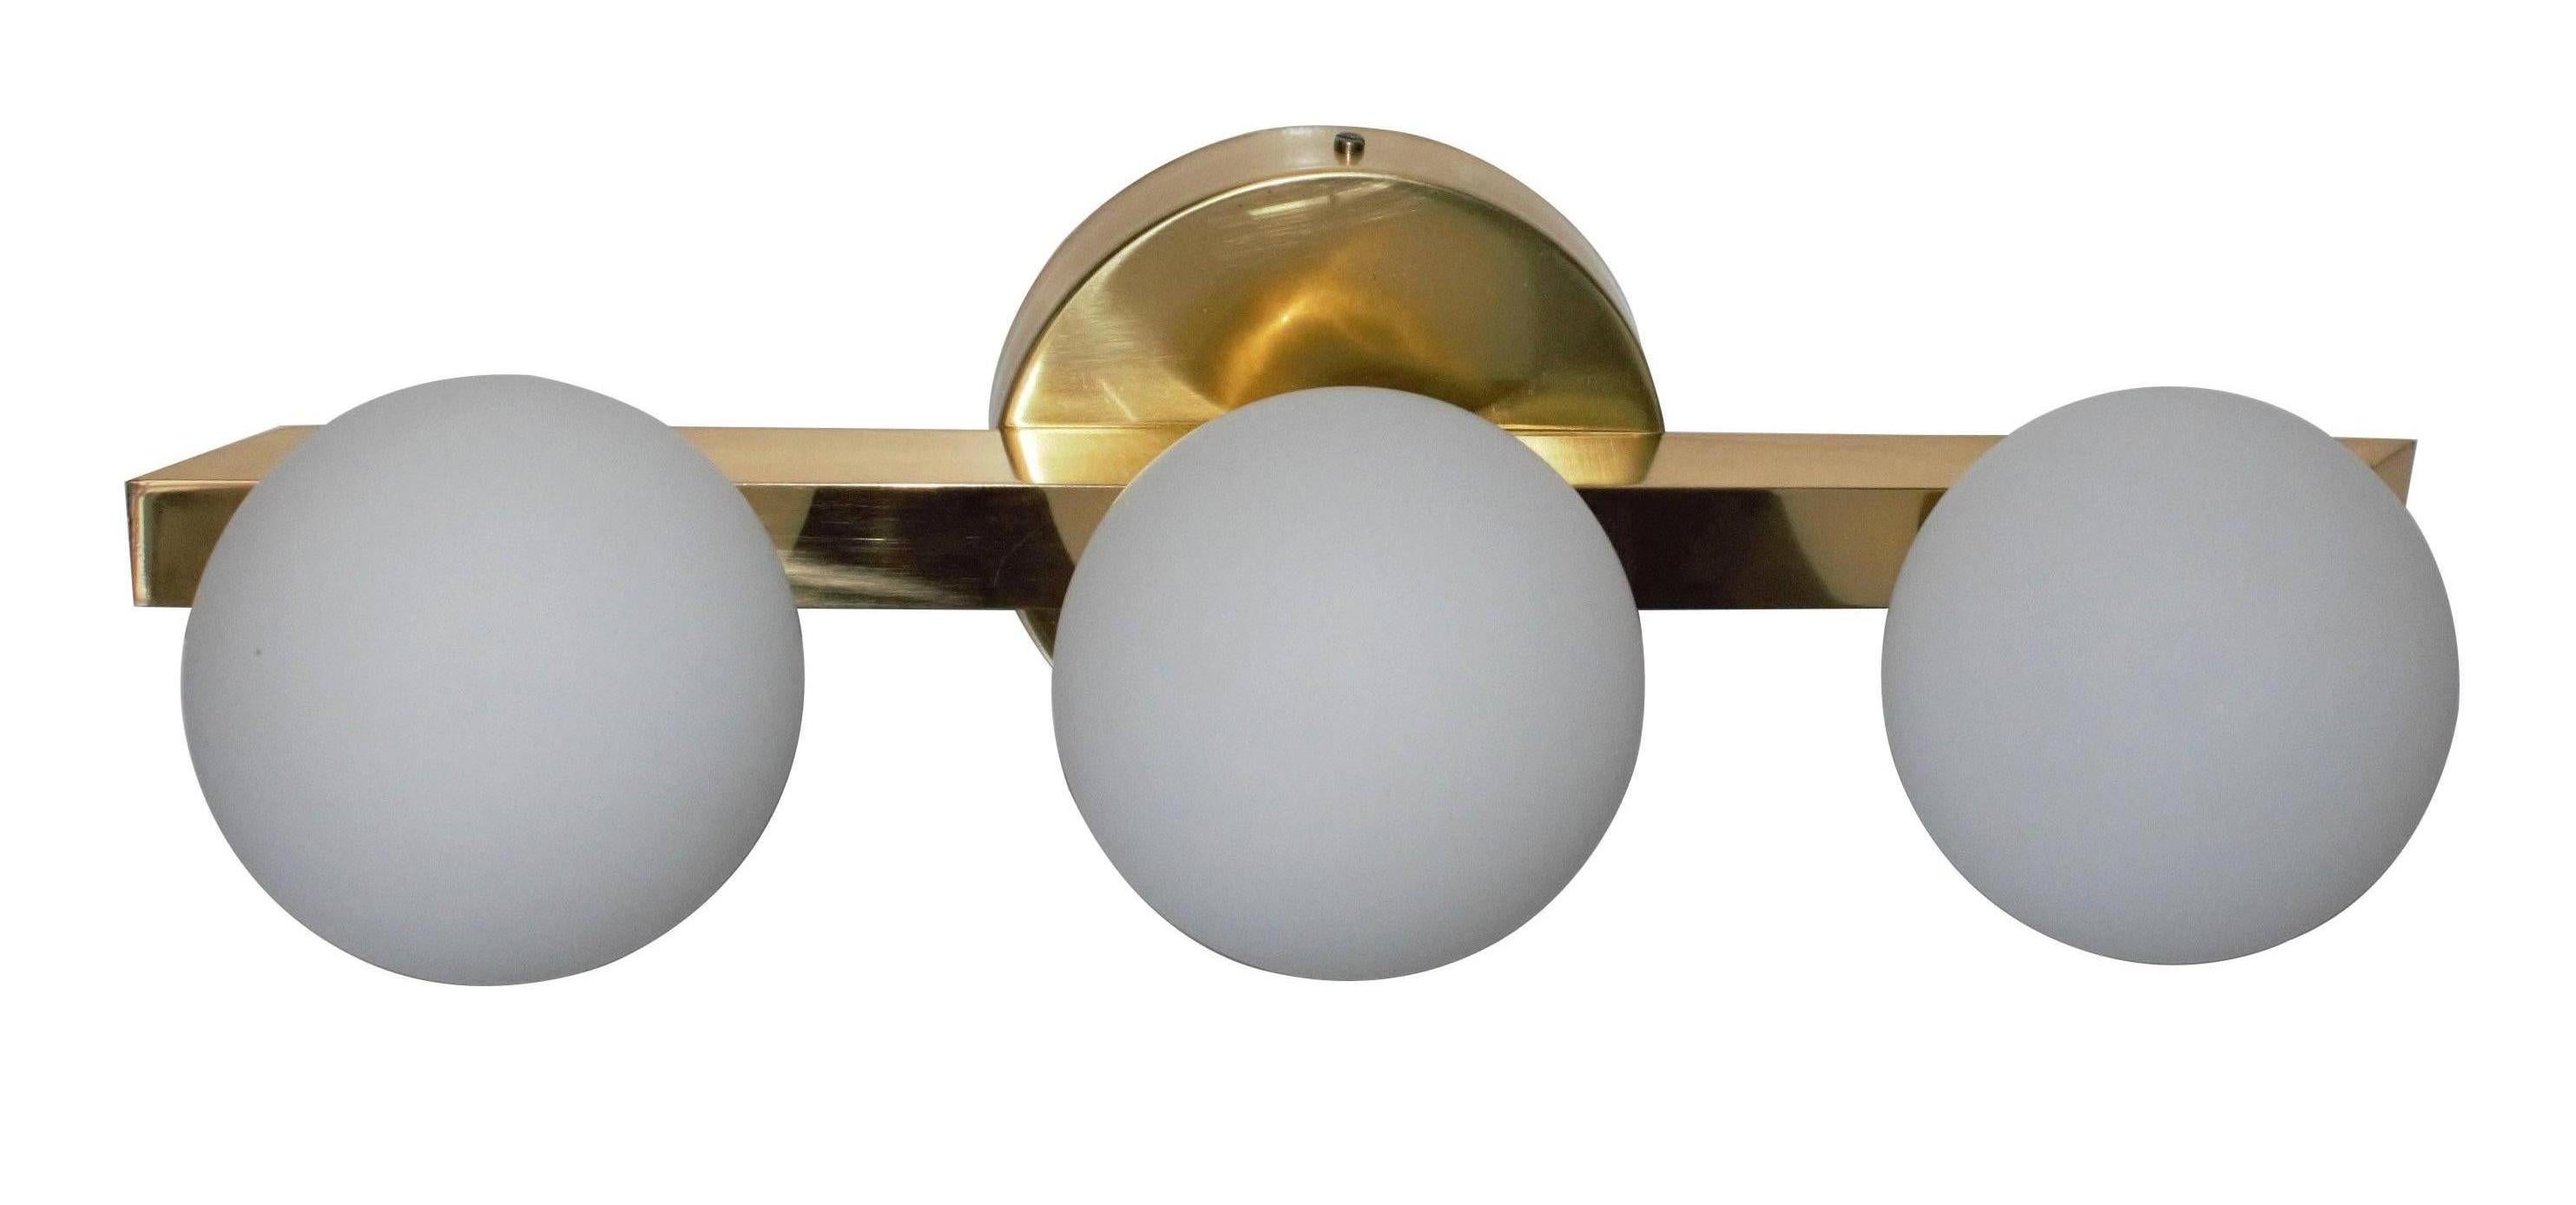 Italian Murano wall light or flush mount with hand blown frosted white Murano glass globes, mounted on polished brass metal finish frame / Designed by Fabio Bergomi for Fabio Ltd / Made in Italy 
3 lights / E12 or E14 type / max 40W each  
Height: